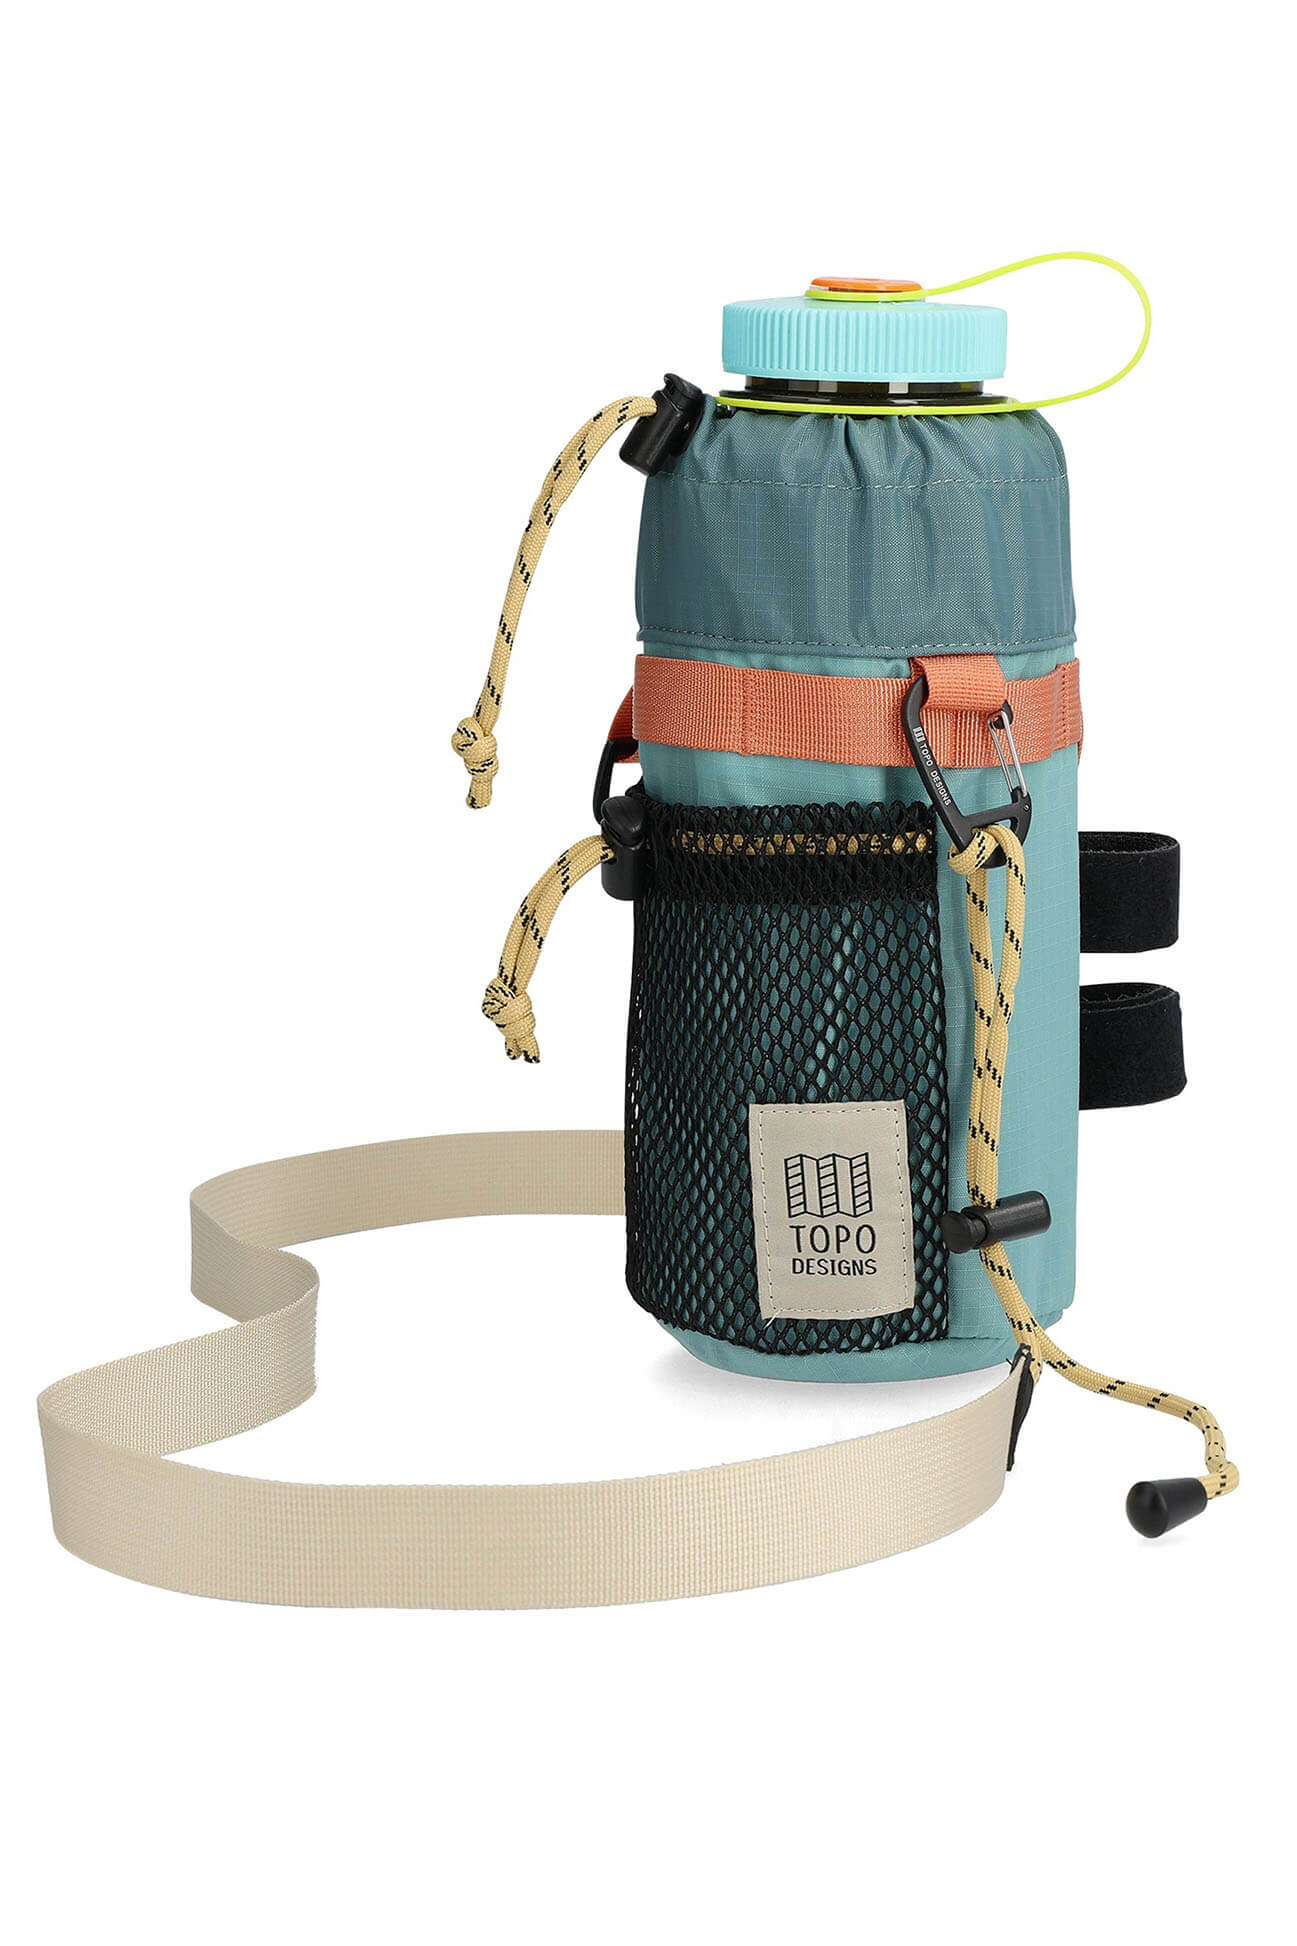 Topo Designs mountain hydro sling in geode green